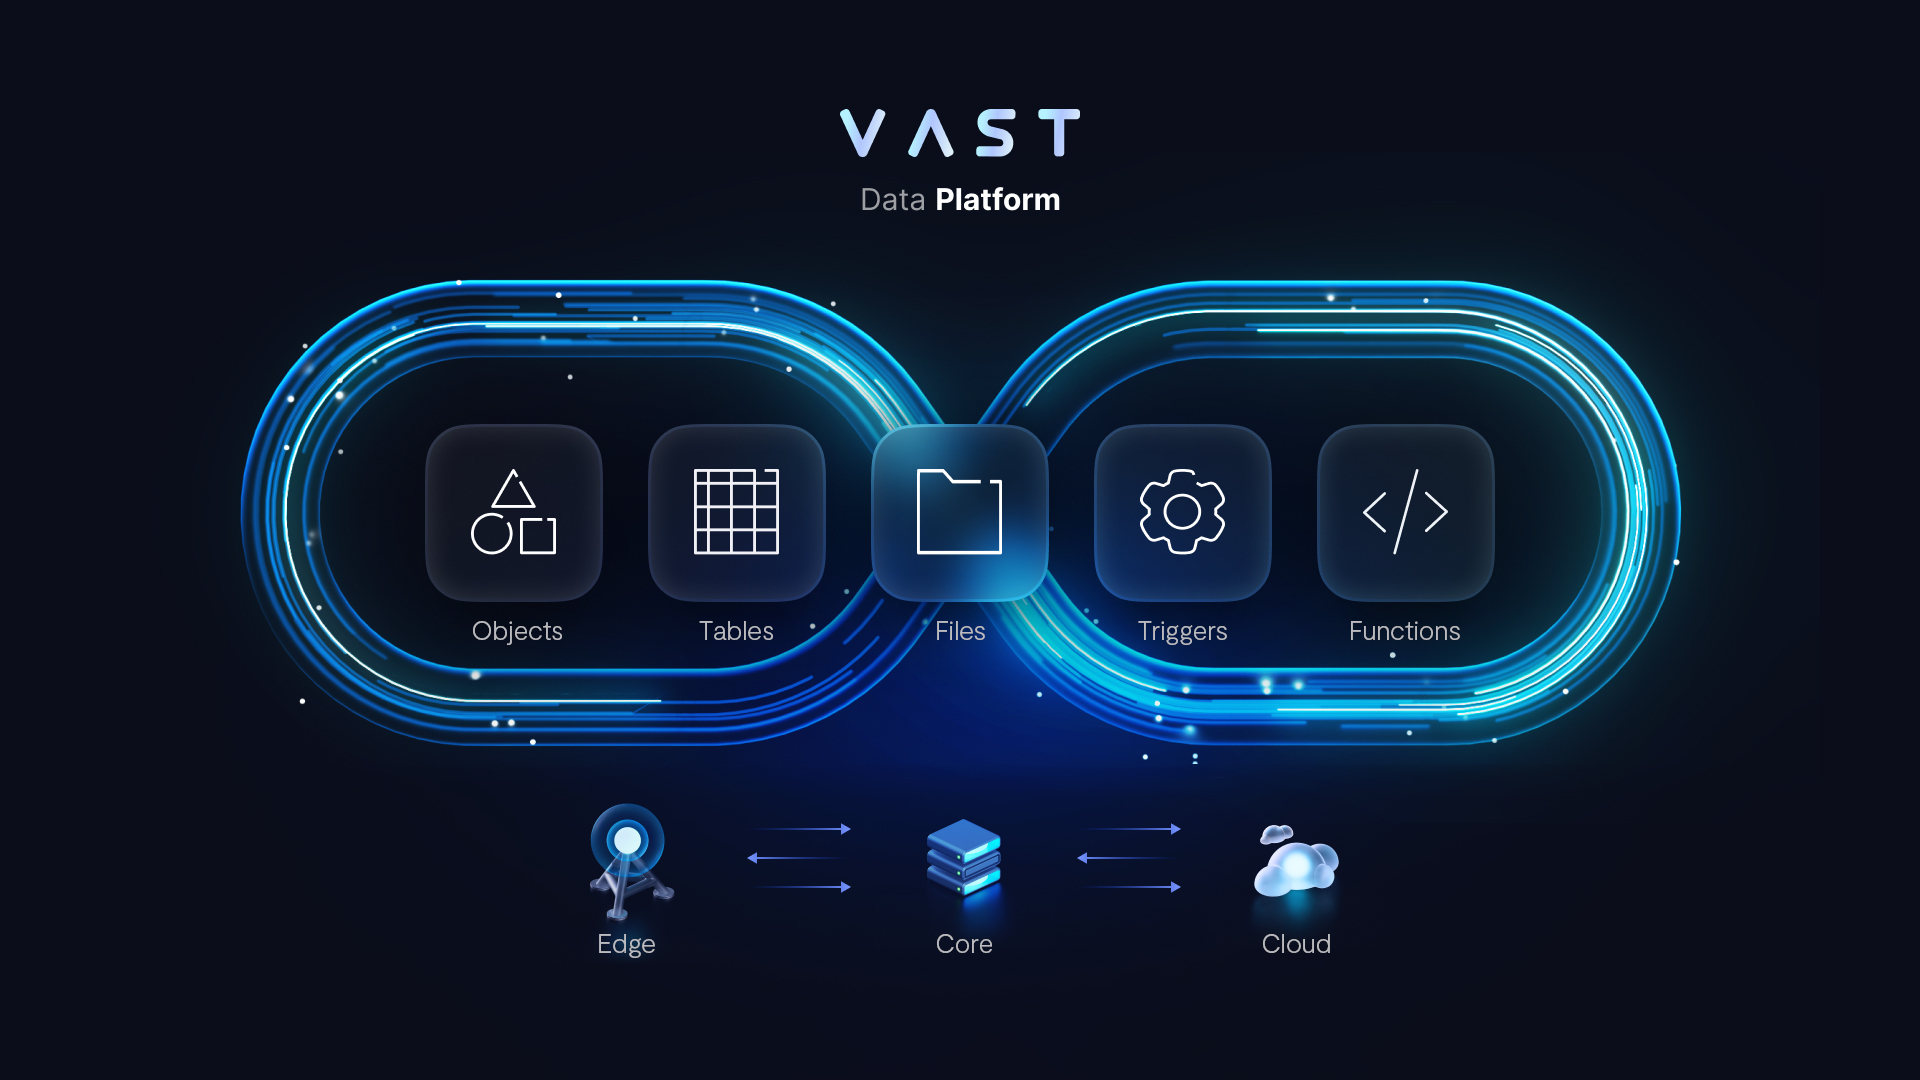 VAST platform enables AI-assisted discovery